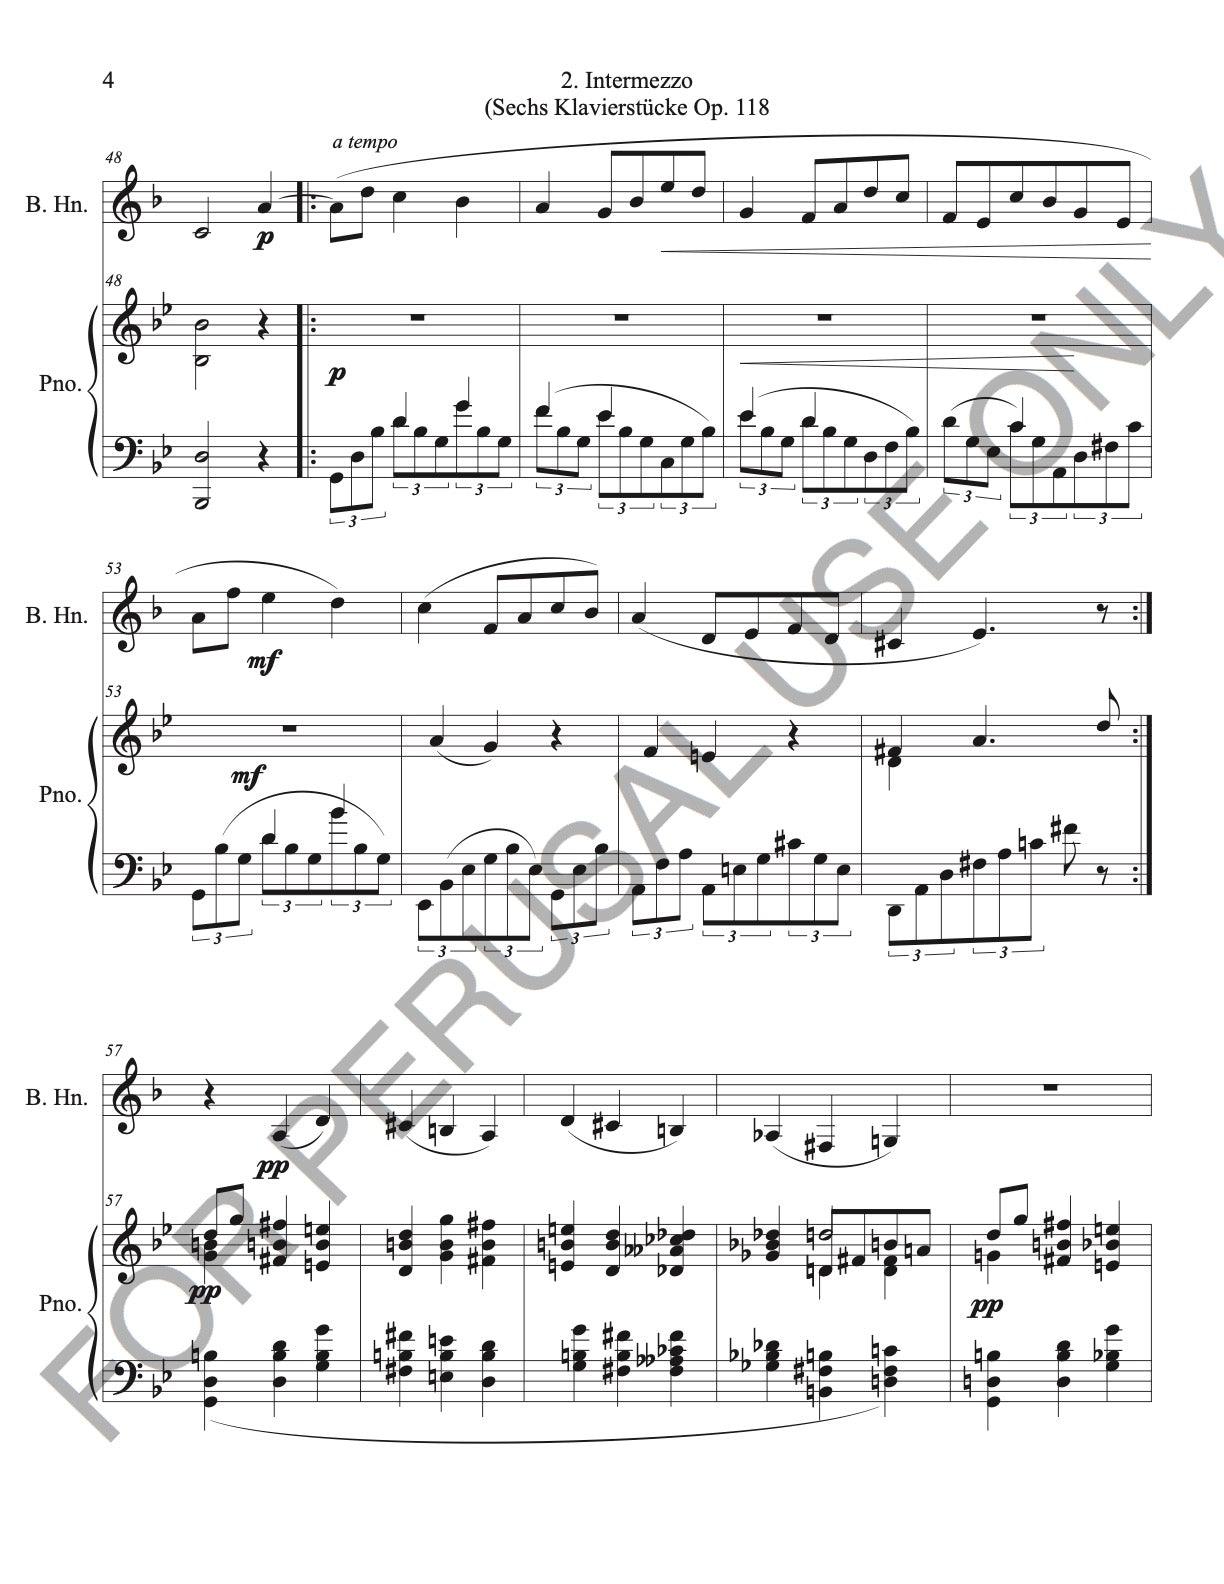 Intermezzo Op. 118 no. 2 by Brahms sheet music for Basset Horn and Piano (score+parts) - ChaipruckMekara